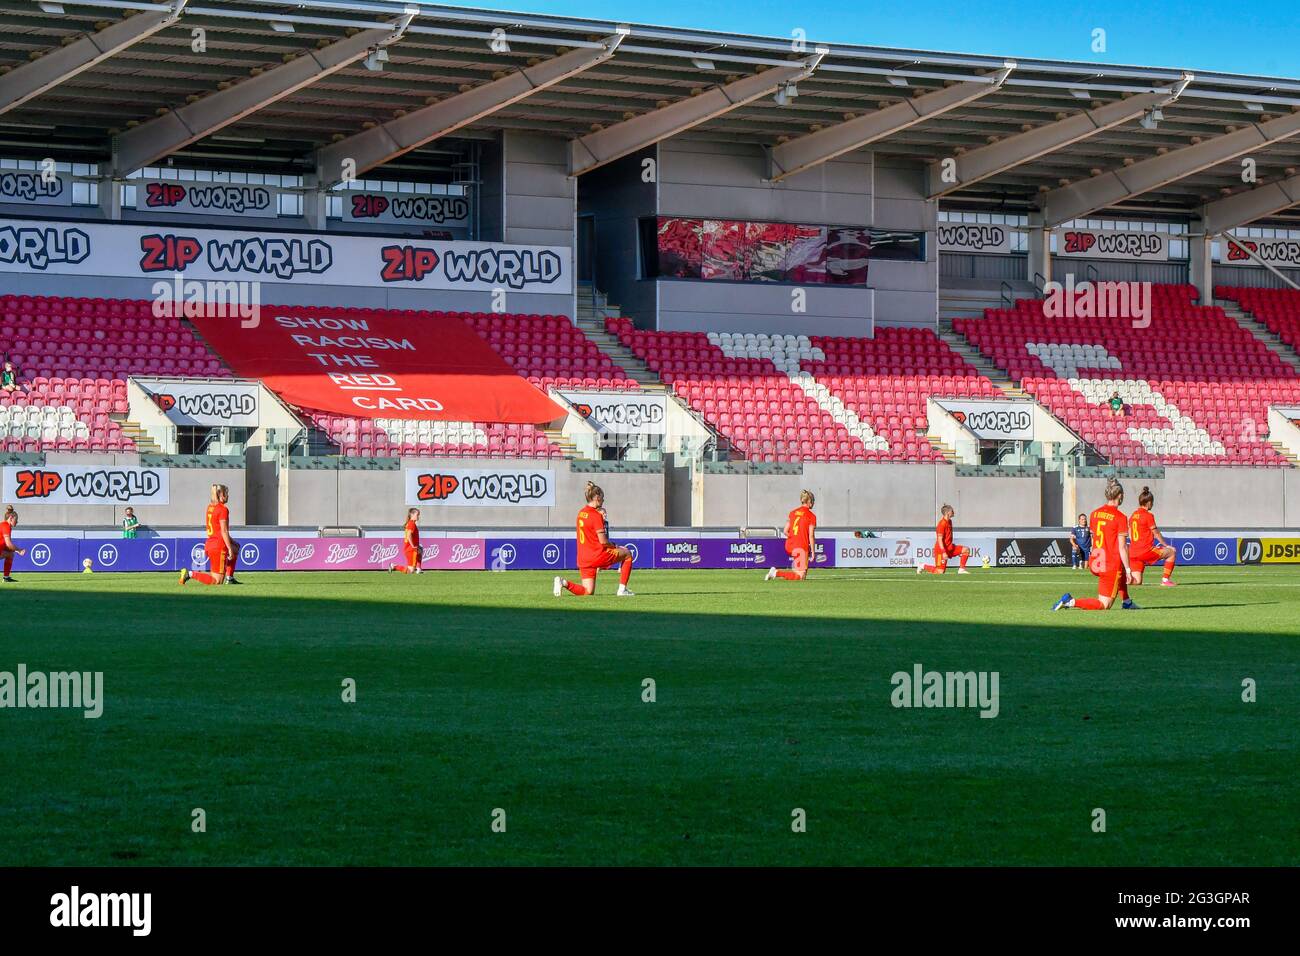 Llanelli, Wales. 15 June, 2021. The Wales Women's team taking the knee before the Women's International Friendly match between Wales Women and Scotland Women at Parc y Scarlets in Llanelli, Wales, UK on 15, June 2021. Credit: Duncan Thomas/Majestic Media/Alamy Live News. Stock Photo